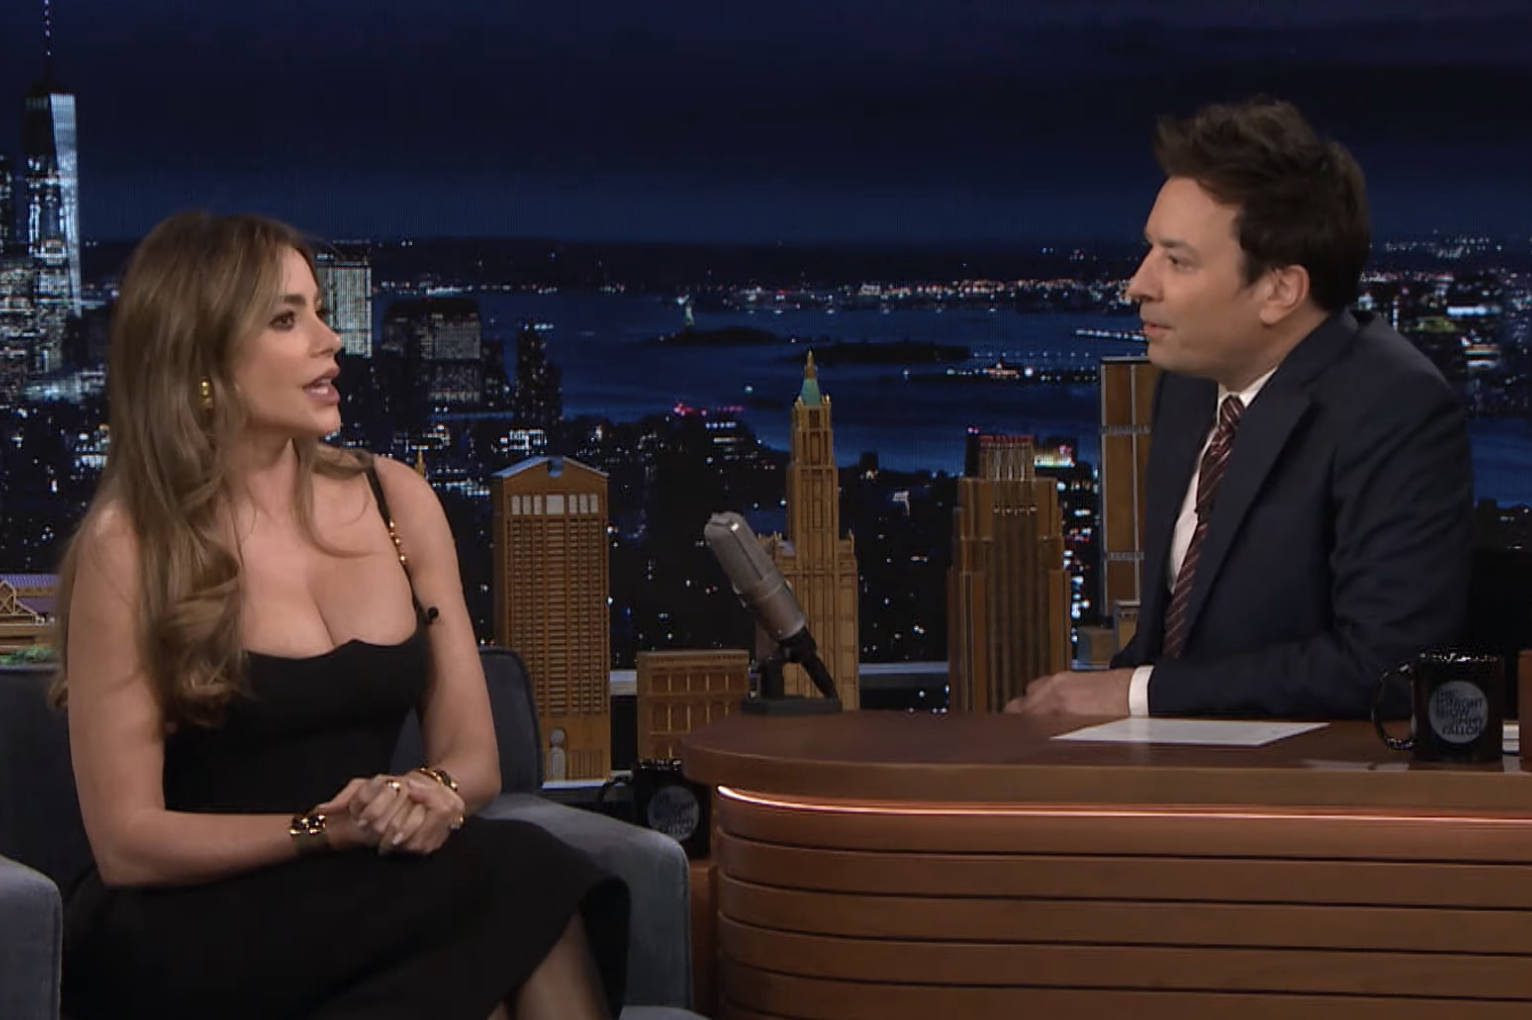 jimmy and sofia talking on the show